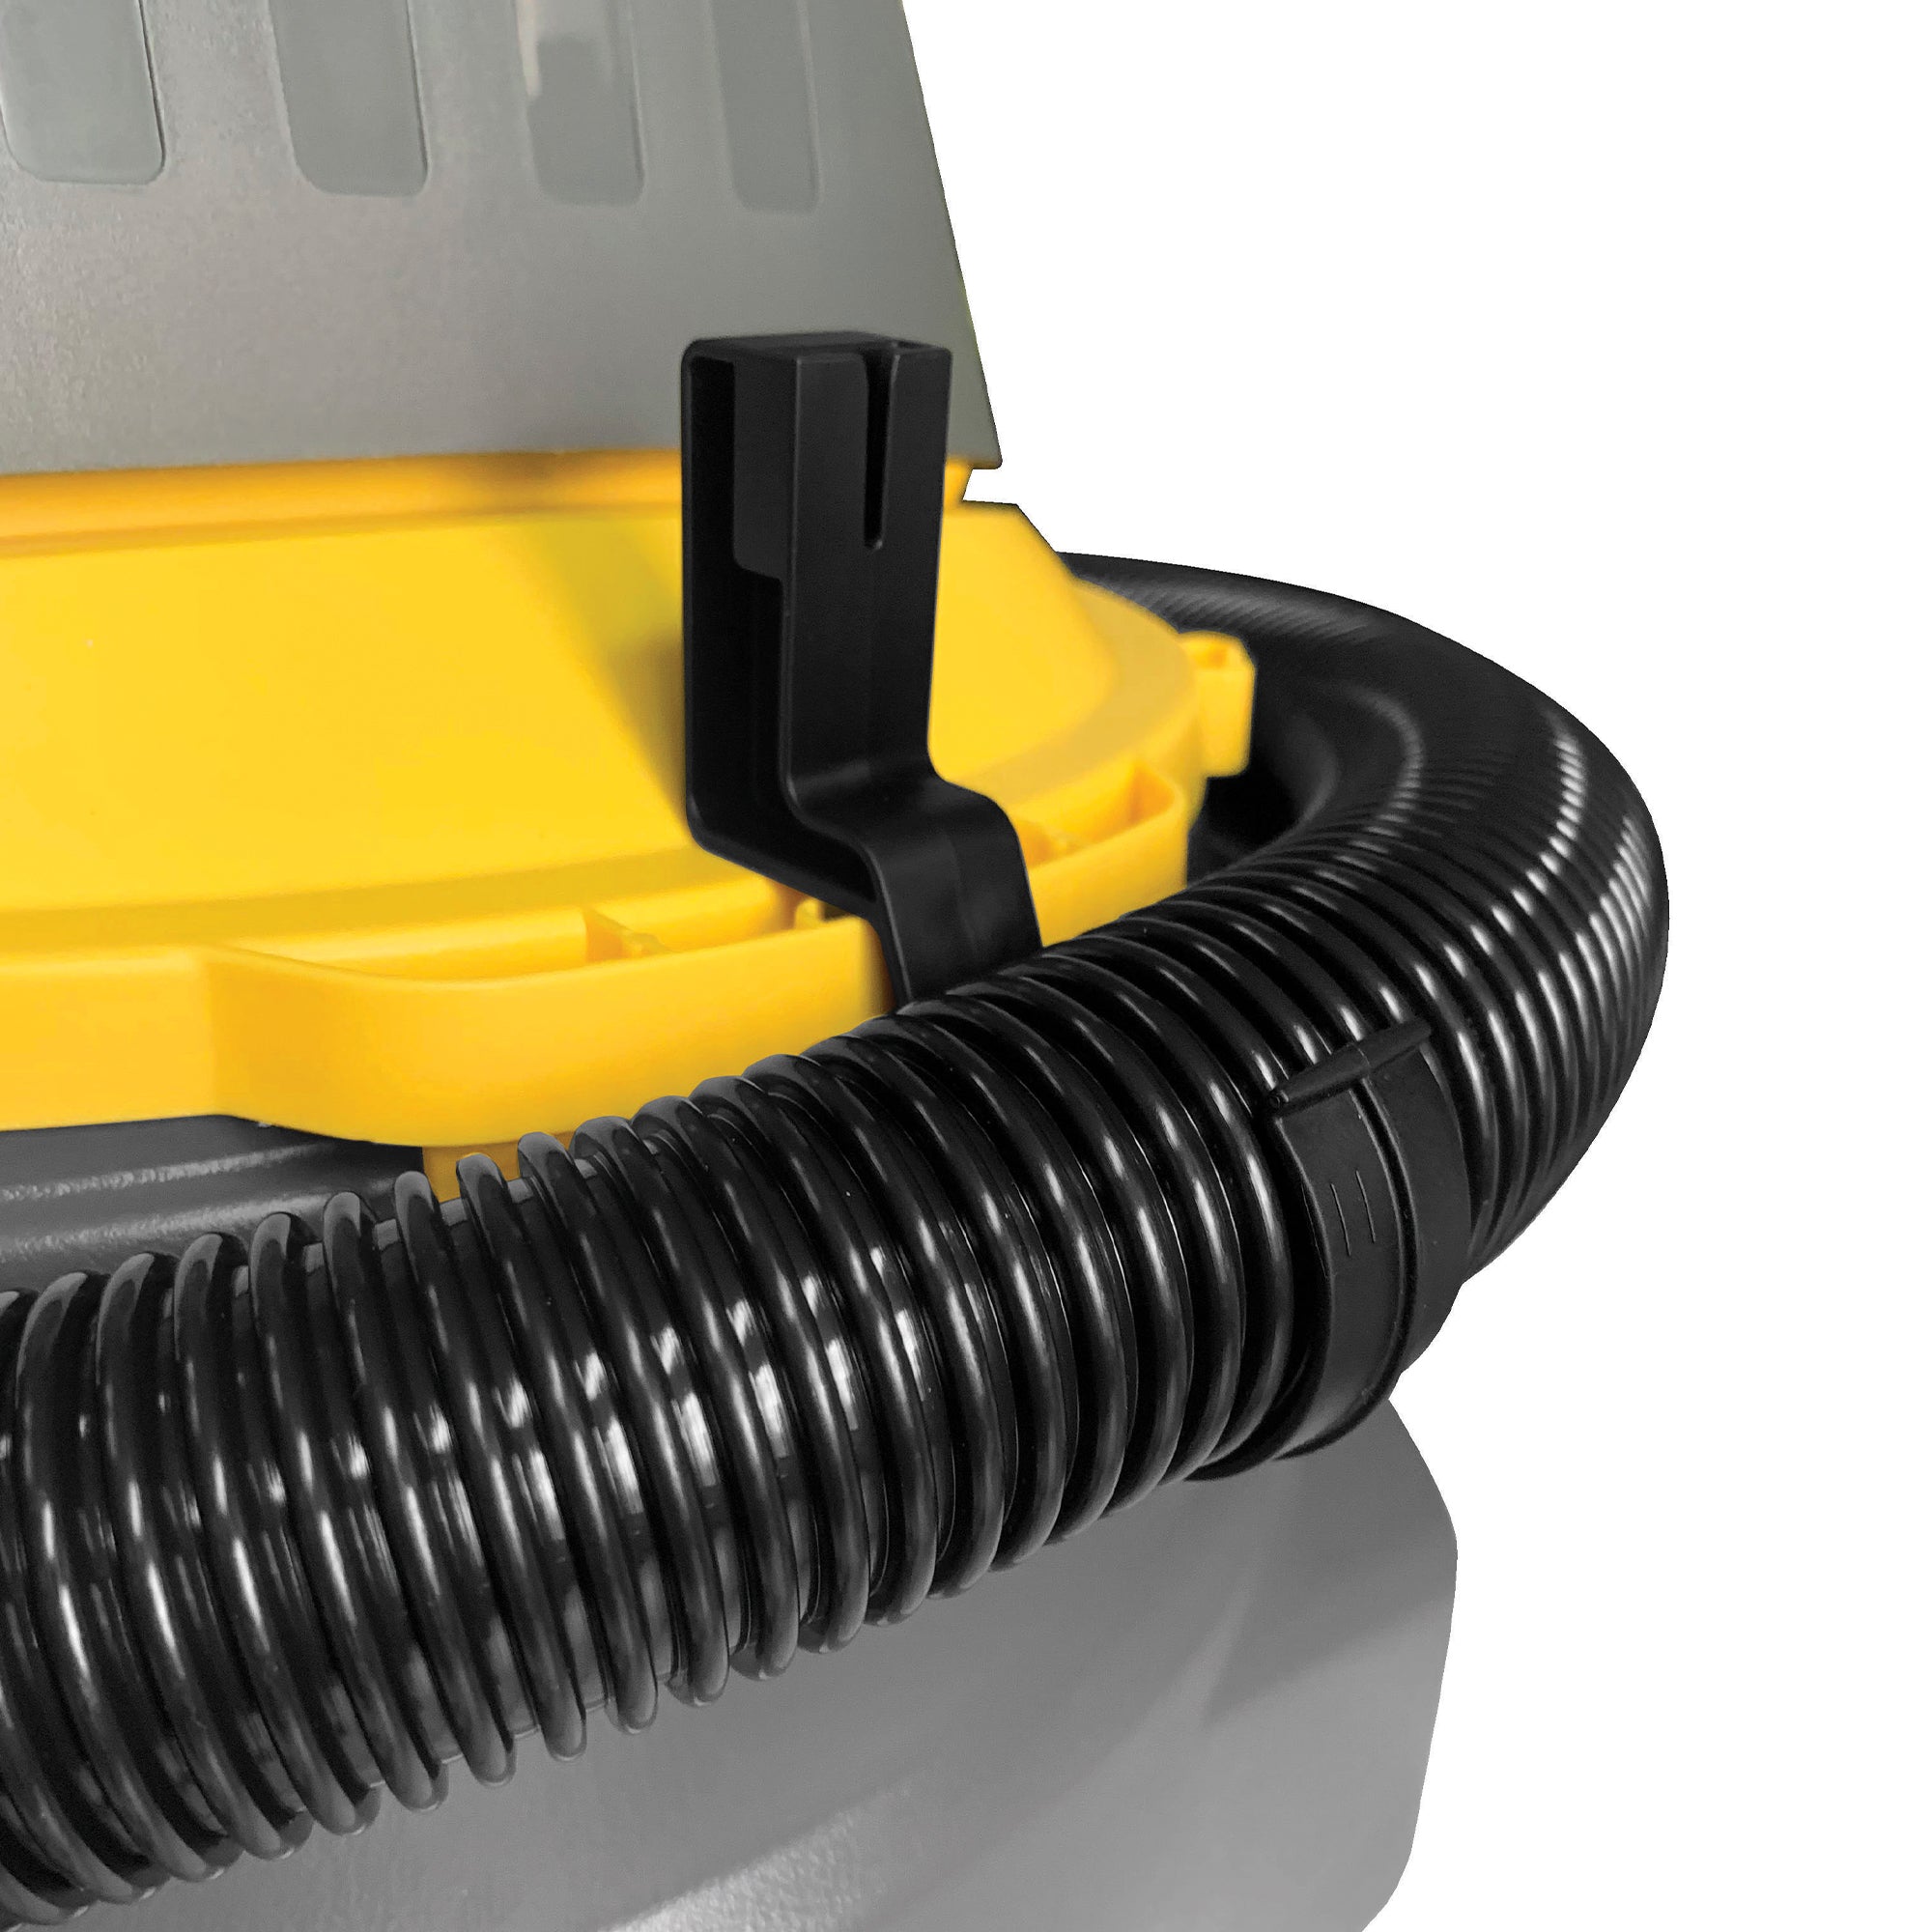 Contractor 6 Gallon 5.0 PHP Wet Dry Shop Vacuum WD-6 C212